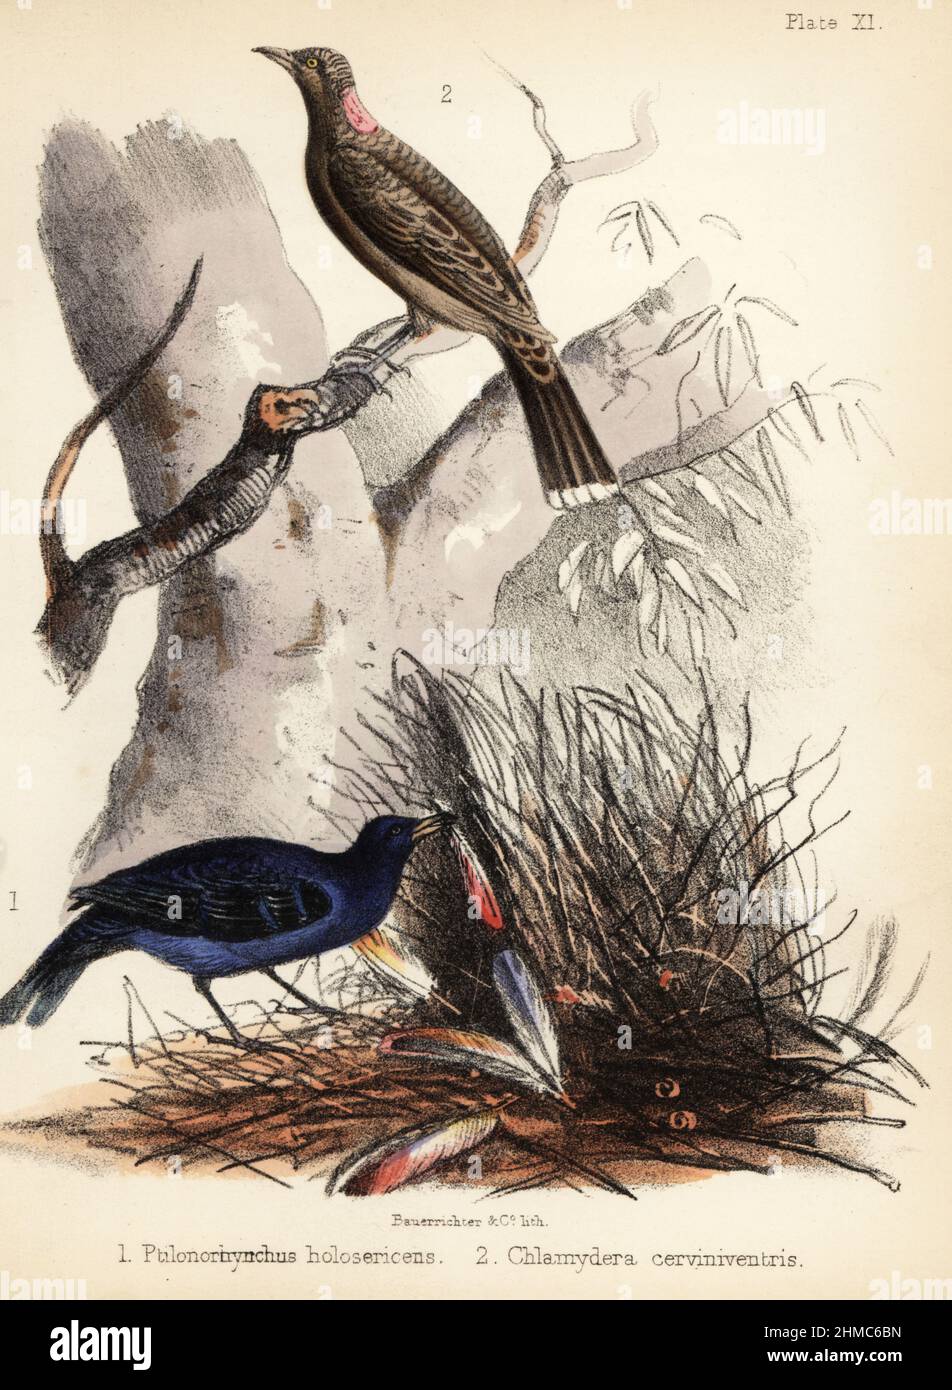 Satin bowerbird, Ptilonorhynchus violaceus, building a nest 1 and fawn-breasted bowerbird, Chlamydera cerviniventris 2. Handcoloured lithograph by Bauerrichter from Adam White’s Popular History of Birds, Lowell Reeve, Covent Garden, London, 1855. Stock Photo